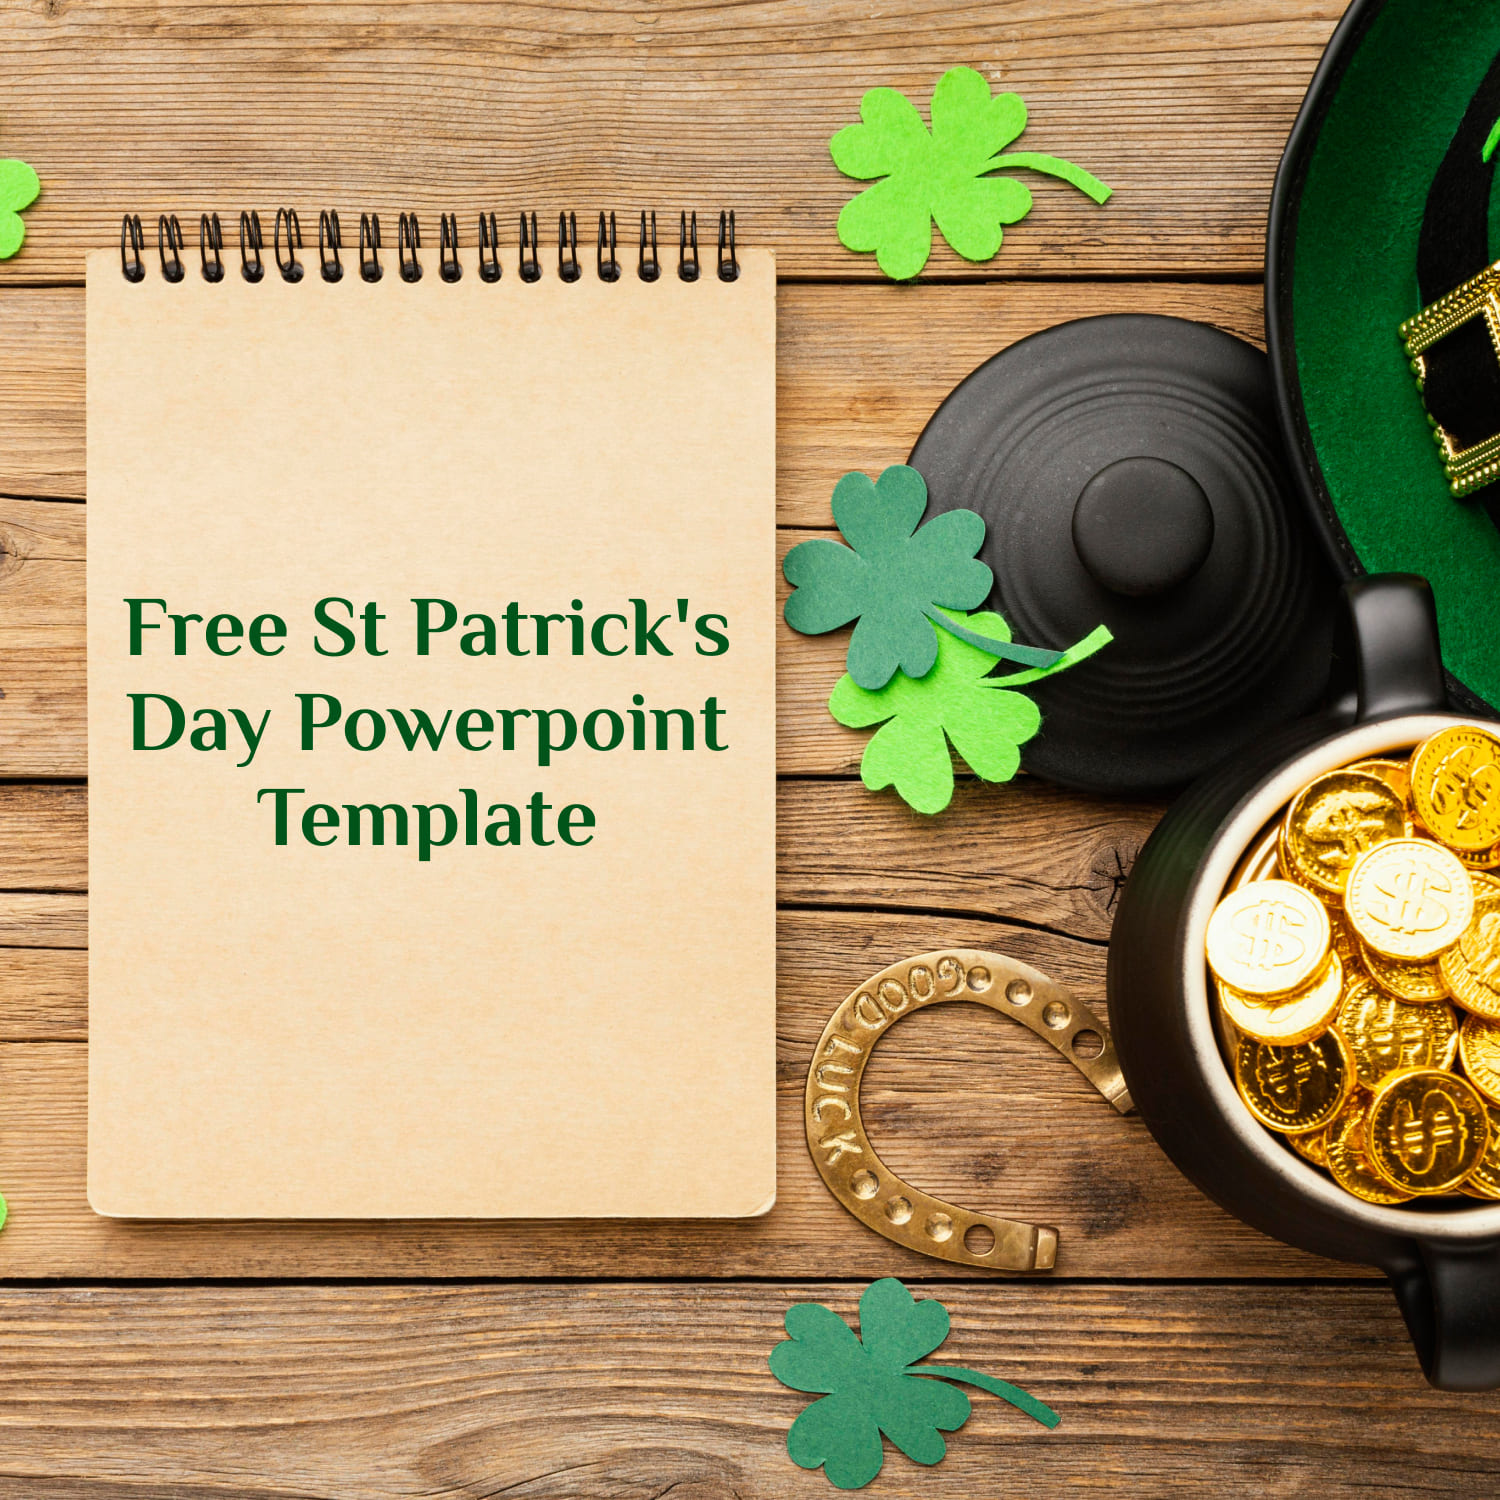 Free St Patricks Day Powerpoint Template.e 1500x1500 1.